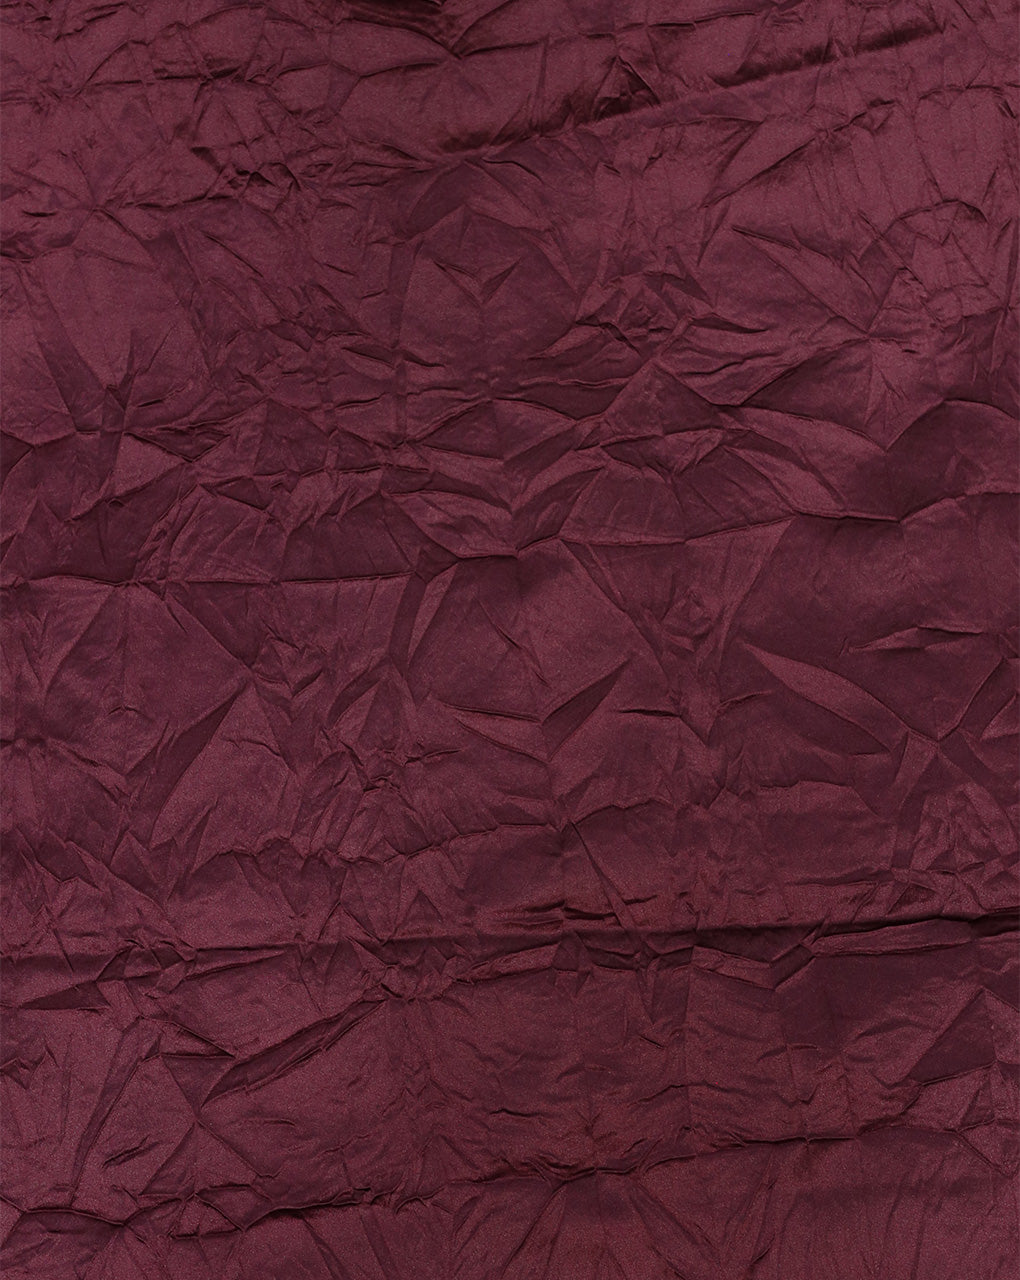 MAROON CRUSHED POLYESTER SATIN FABRIC